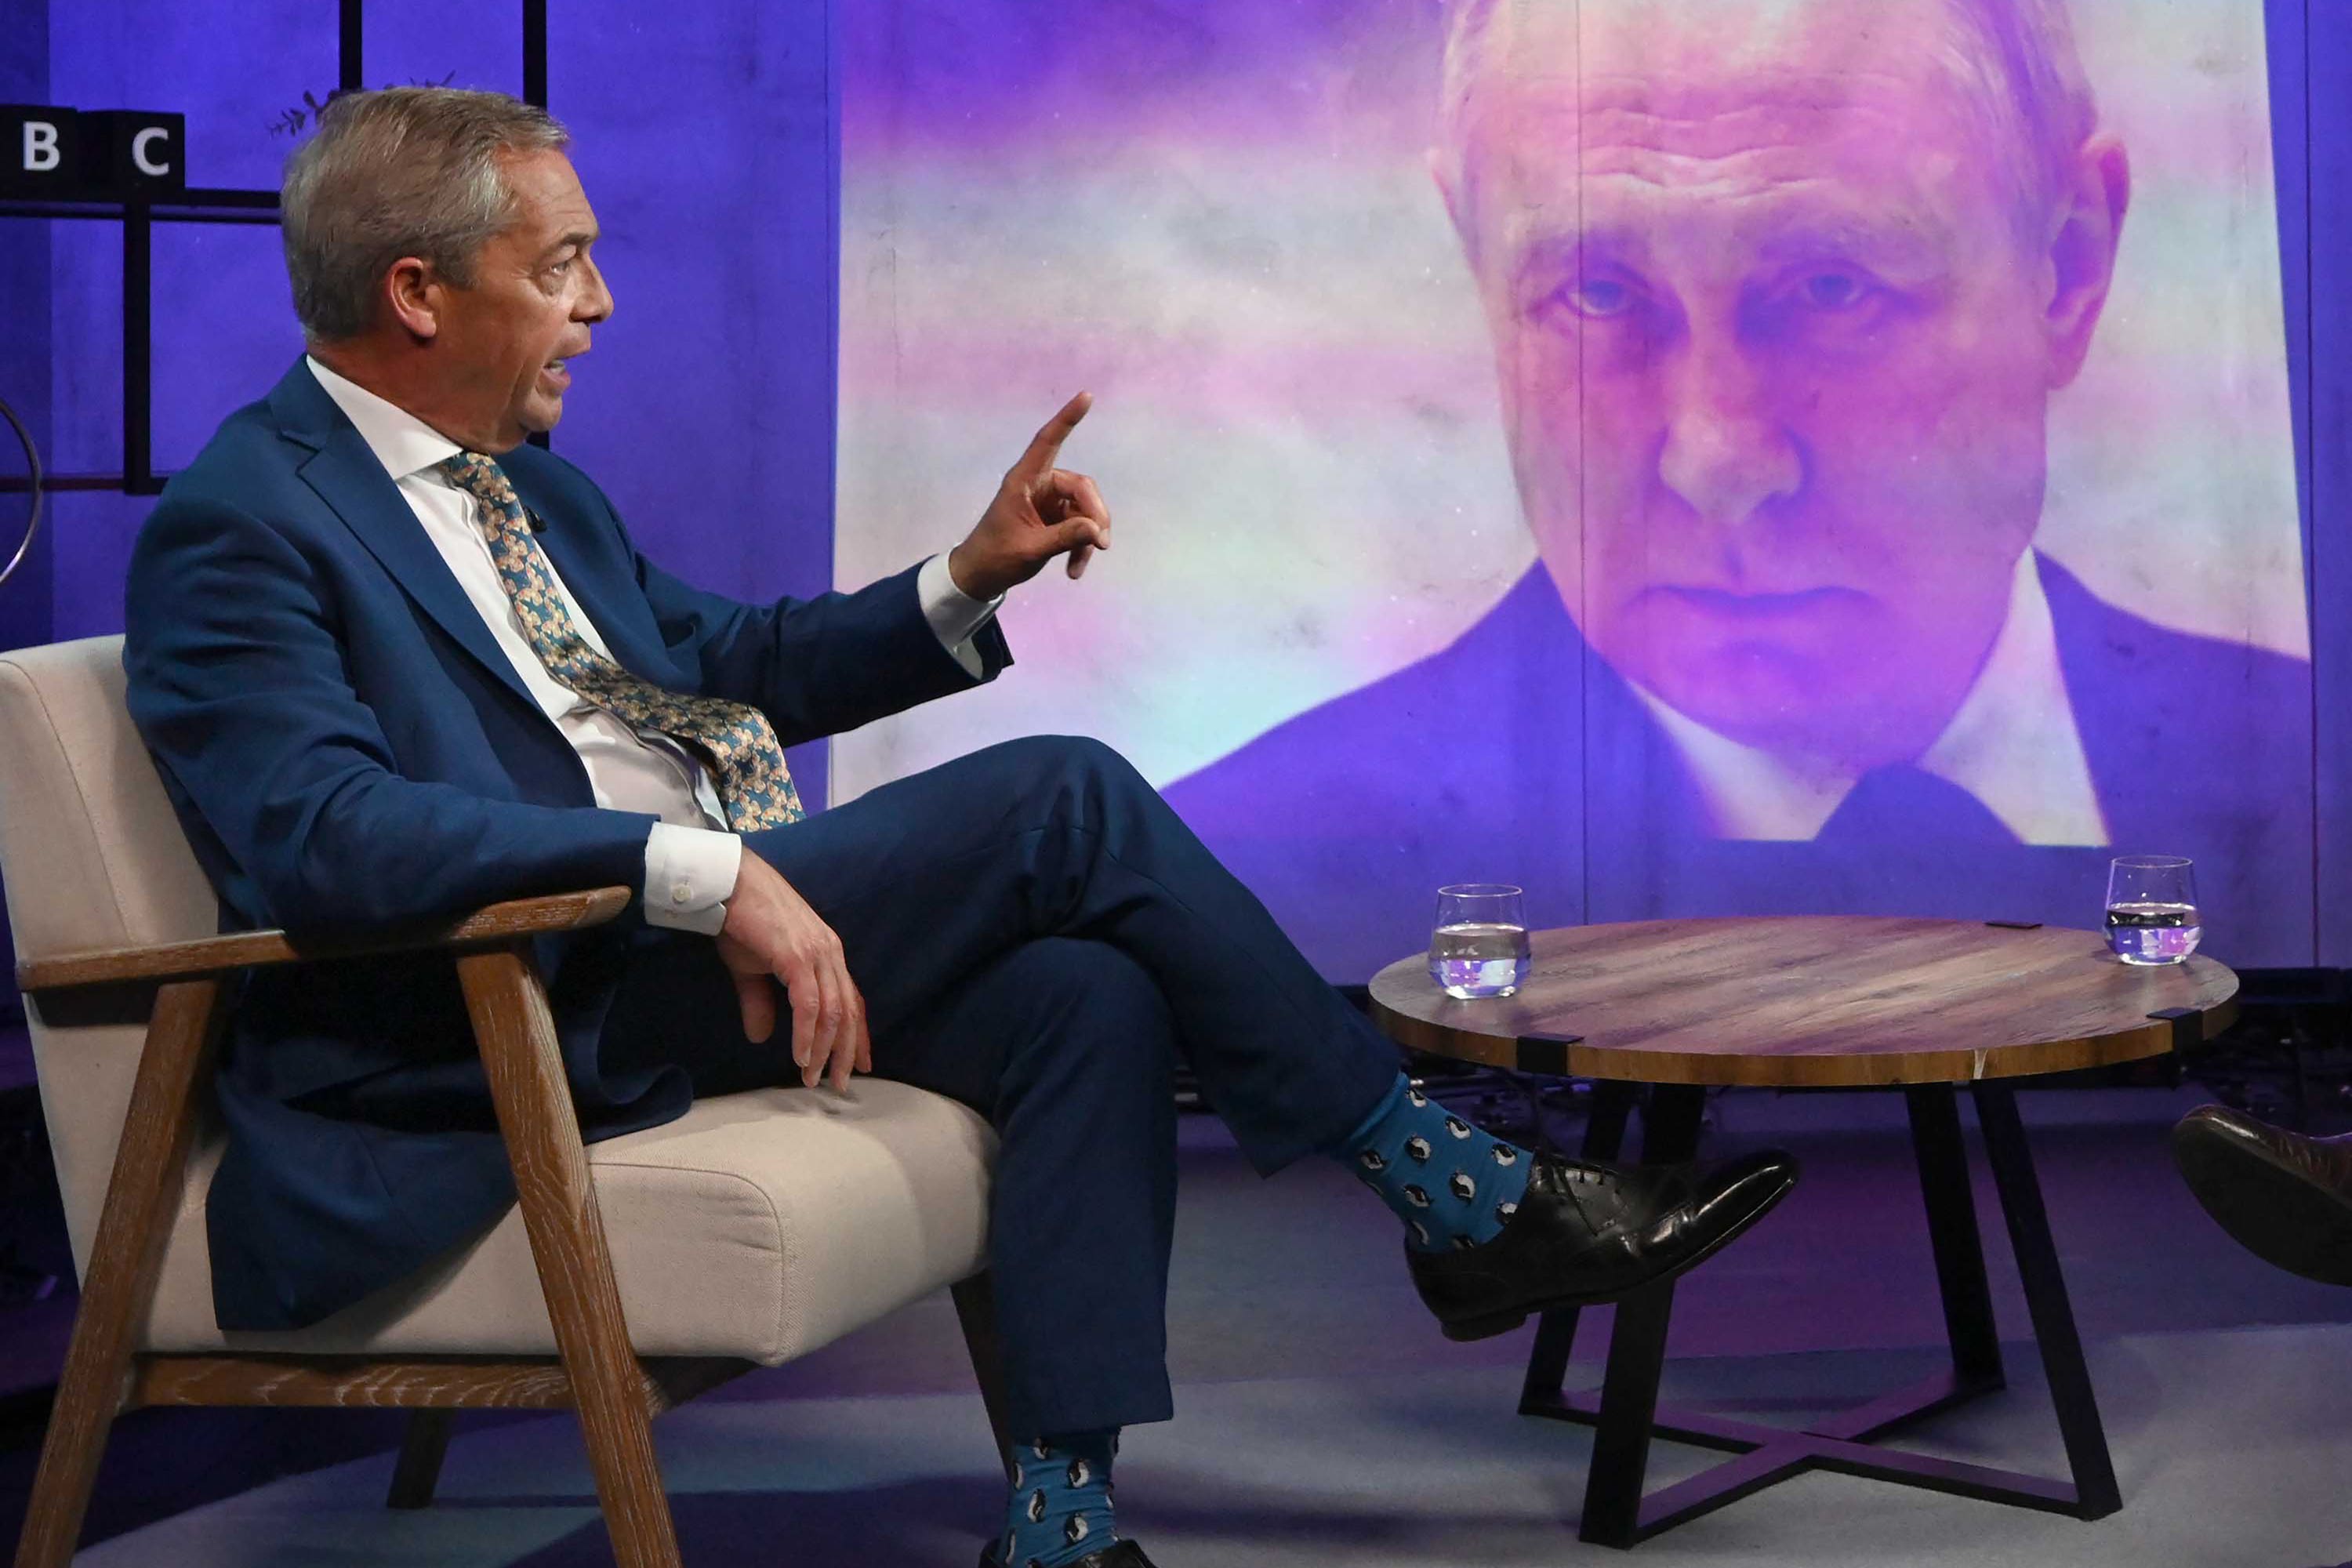 Nigel Farage said the West ‘provoked’ the war in Ukraine